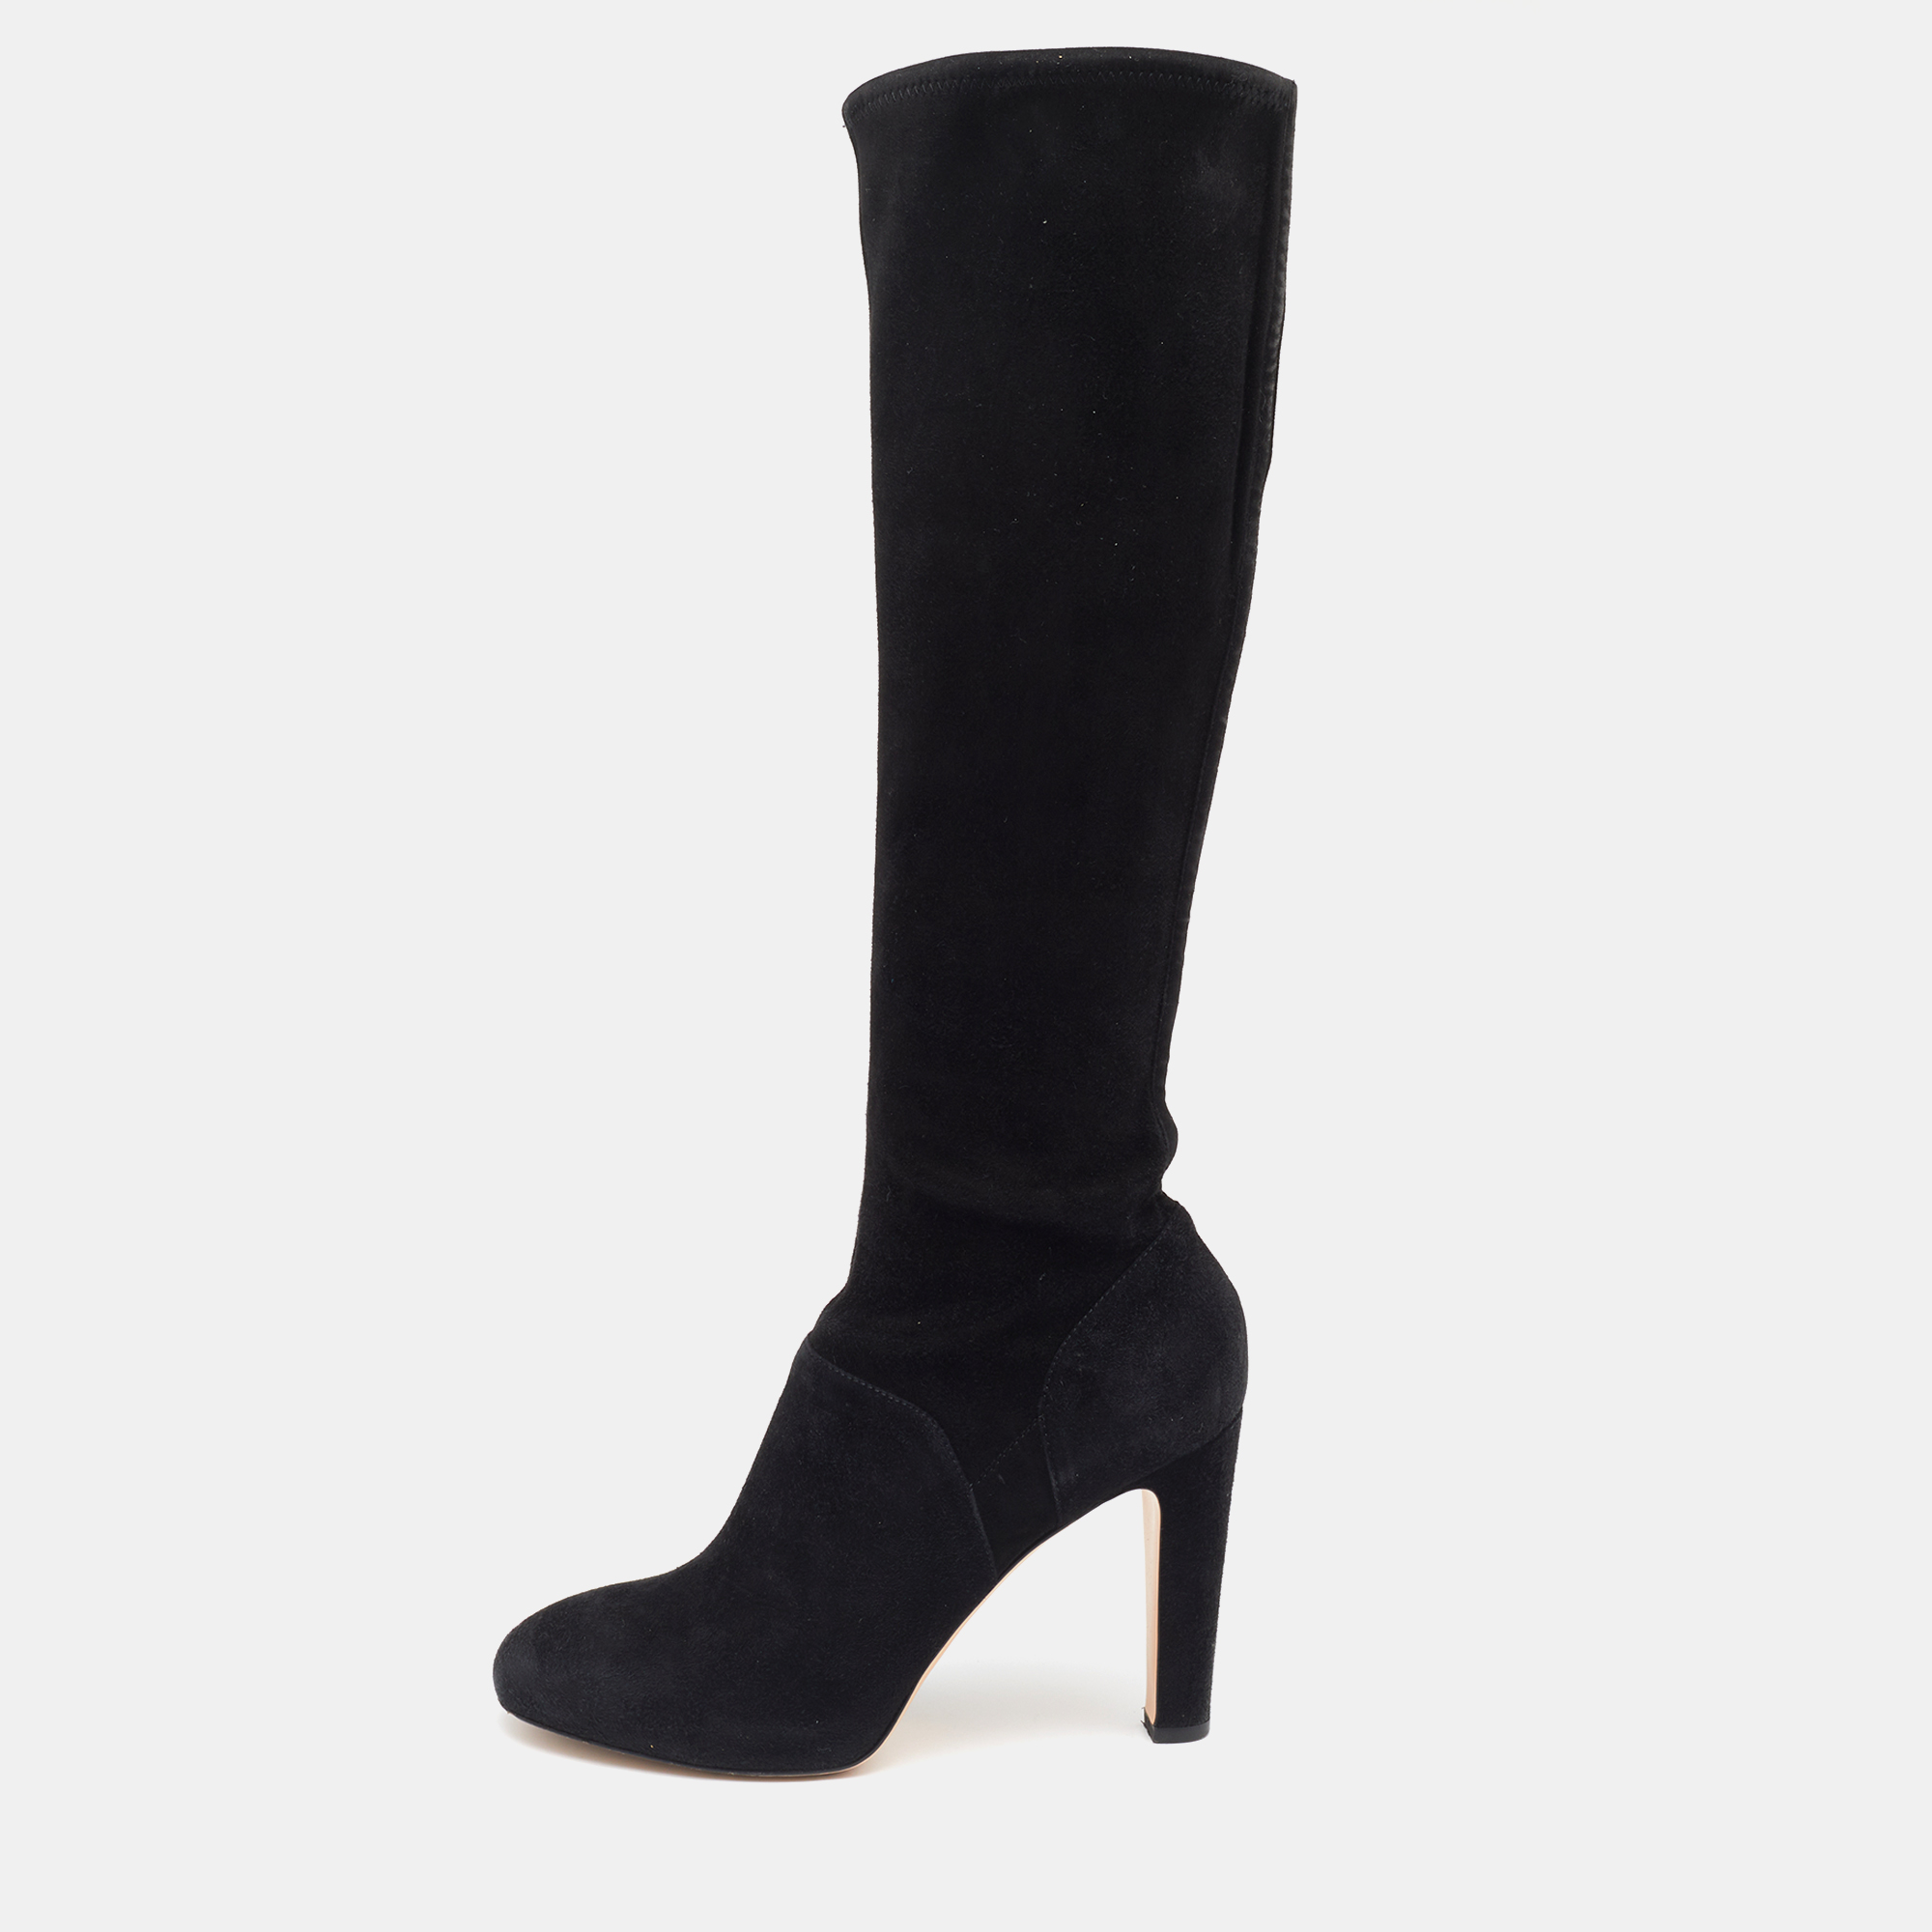 Pre-owned Gianvito Rossi Black Suede Knee Length Boots Size 37.5